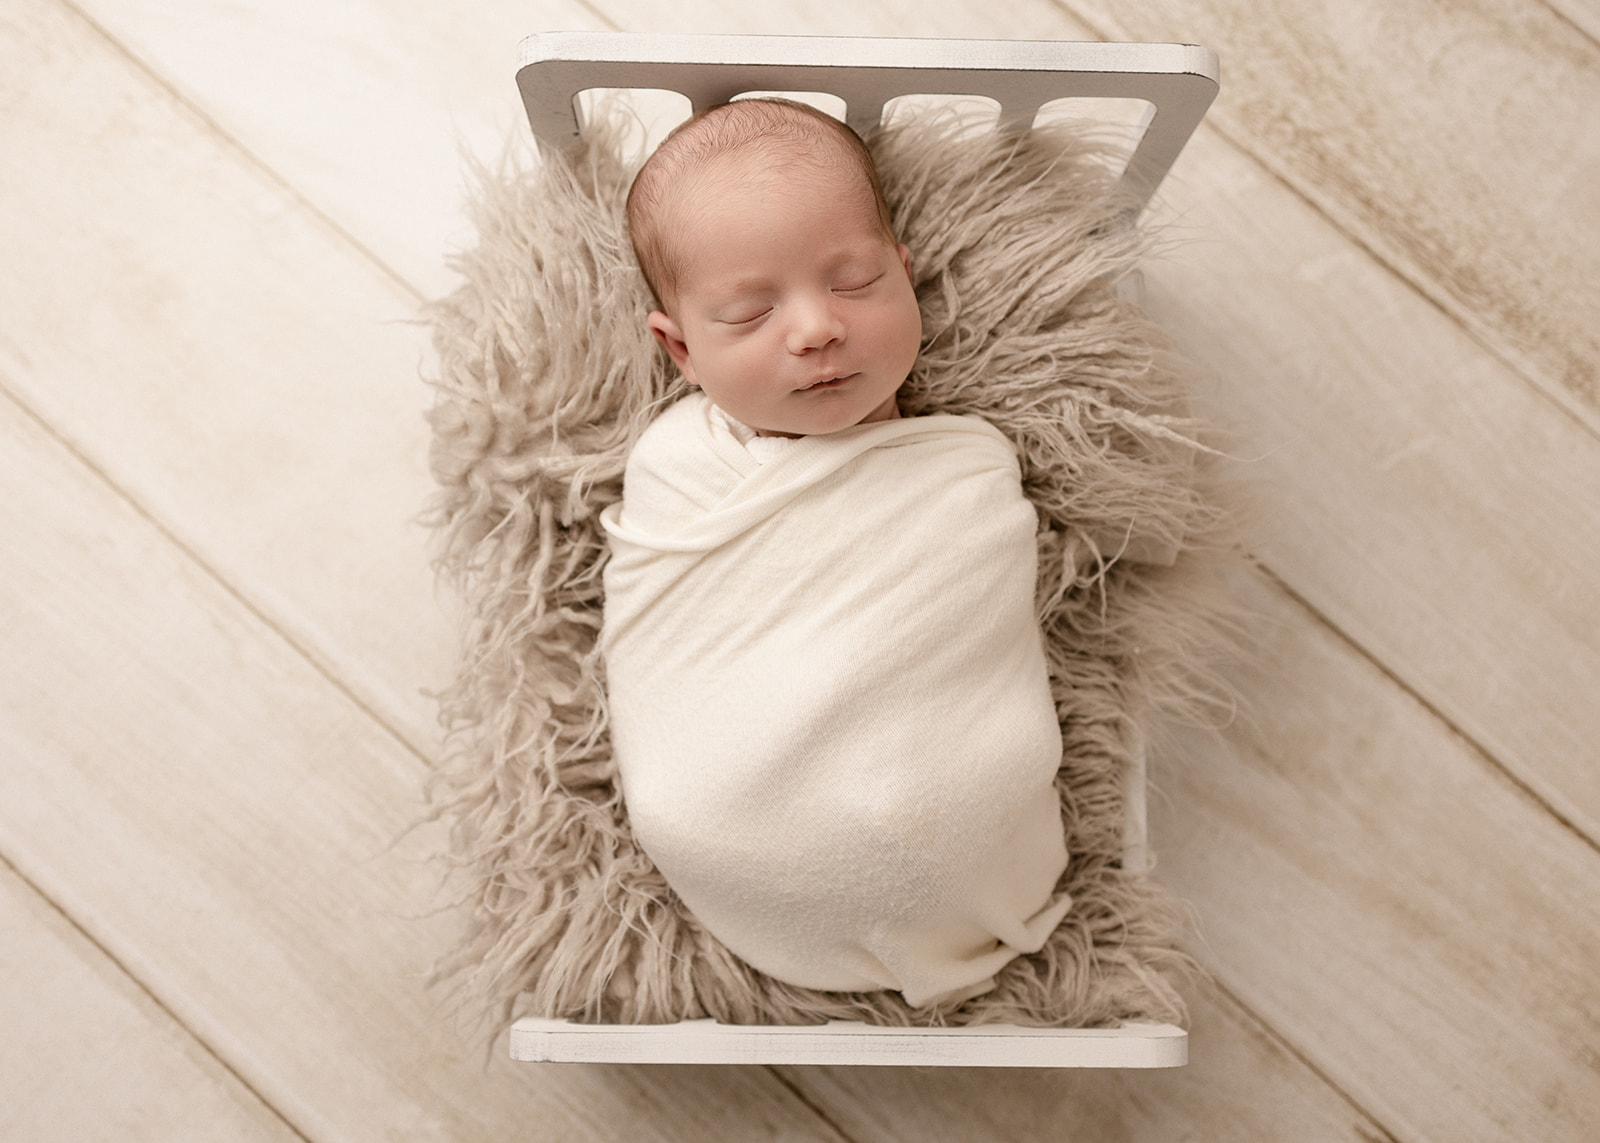 A newborn baby sleeps in a white swaddle on a fur blanket in a tiny bed